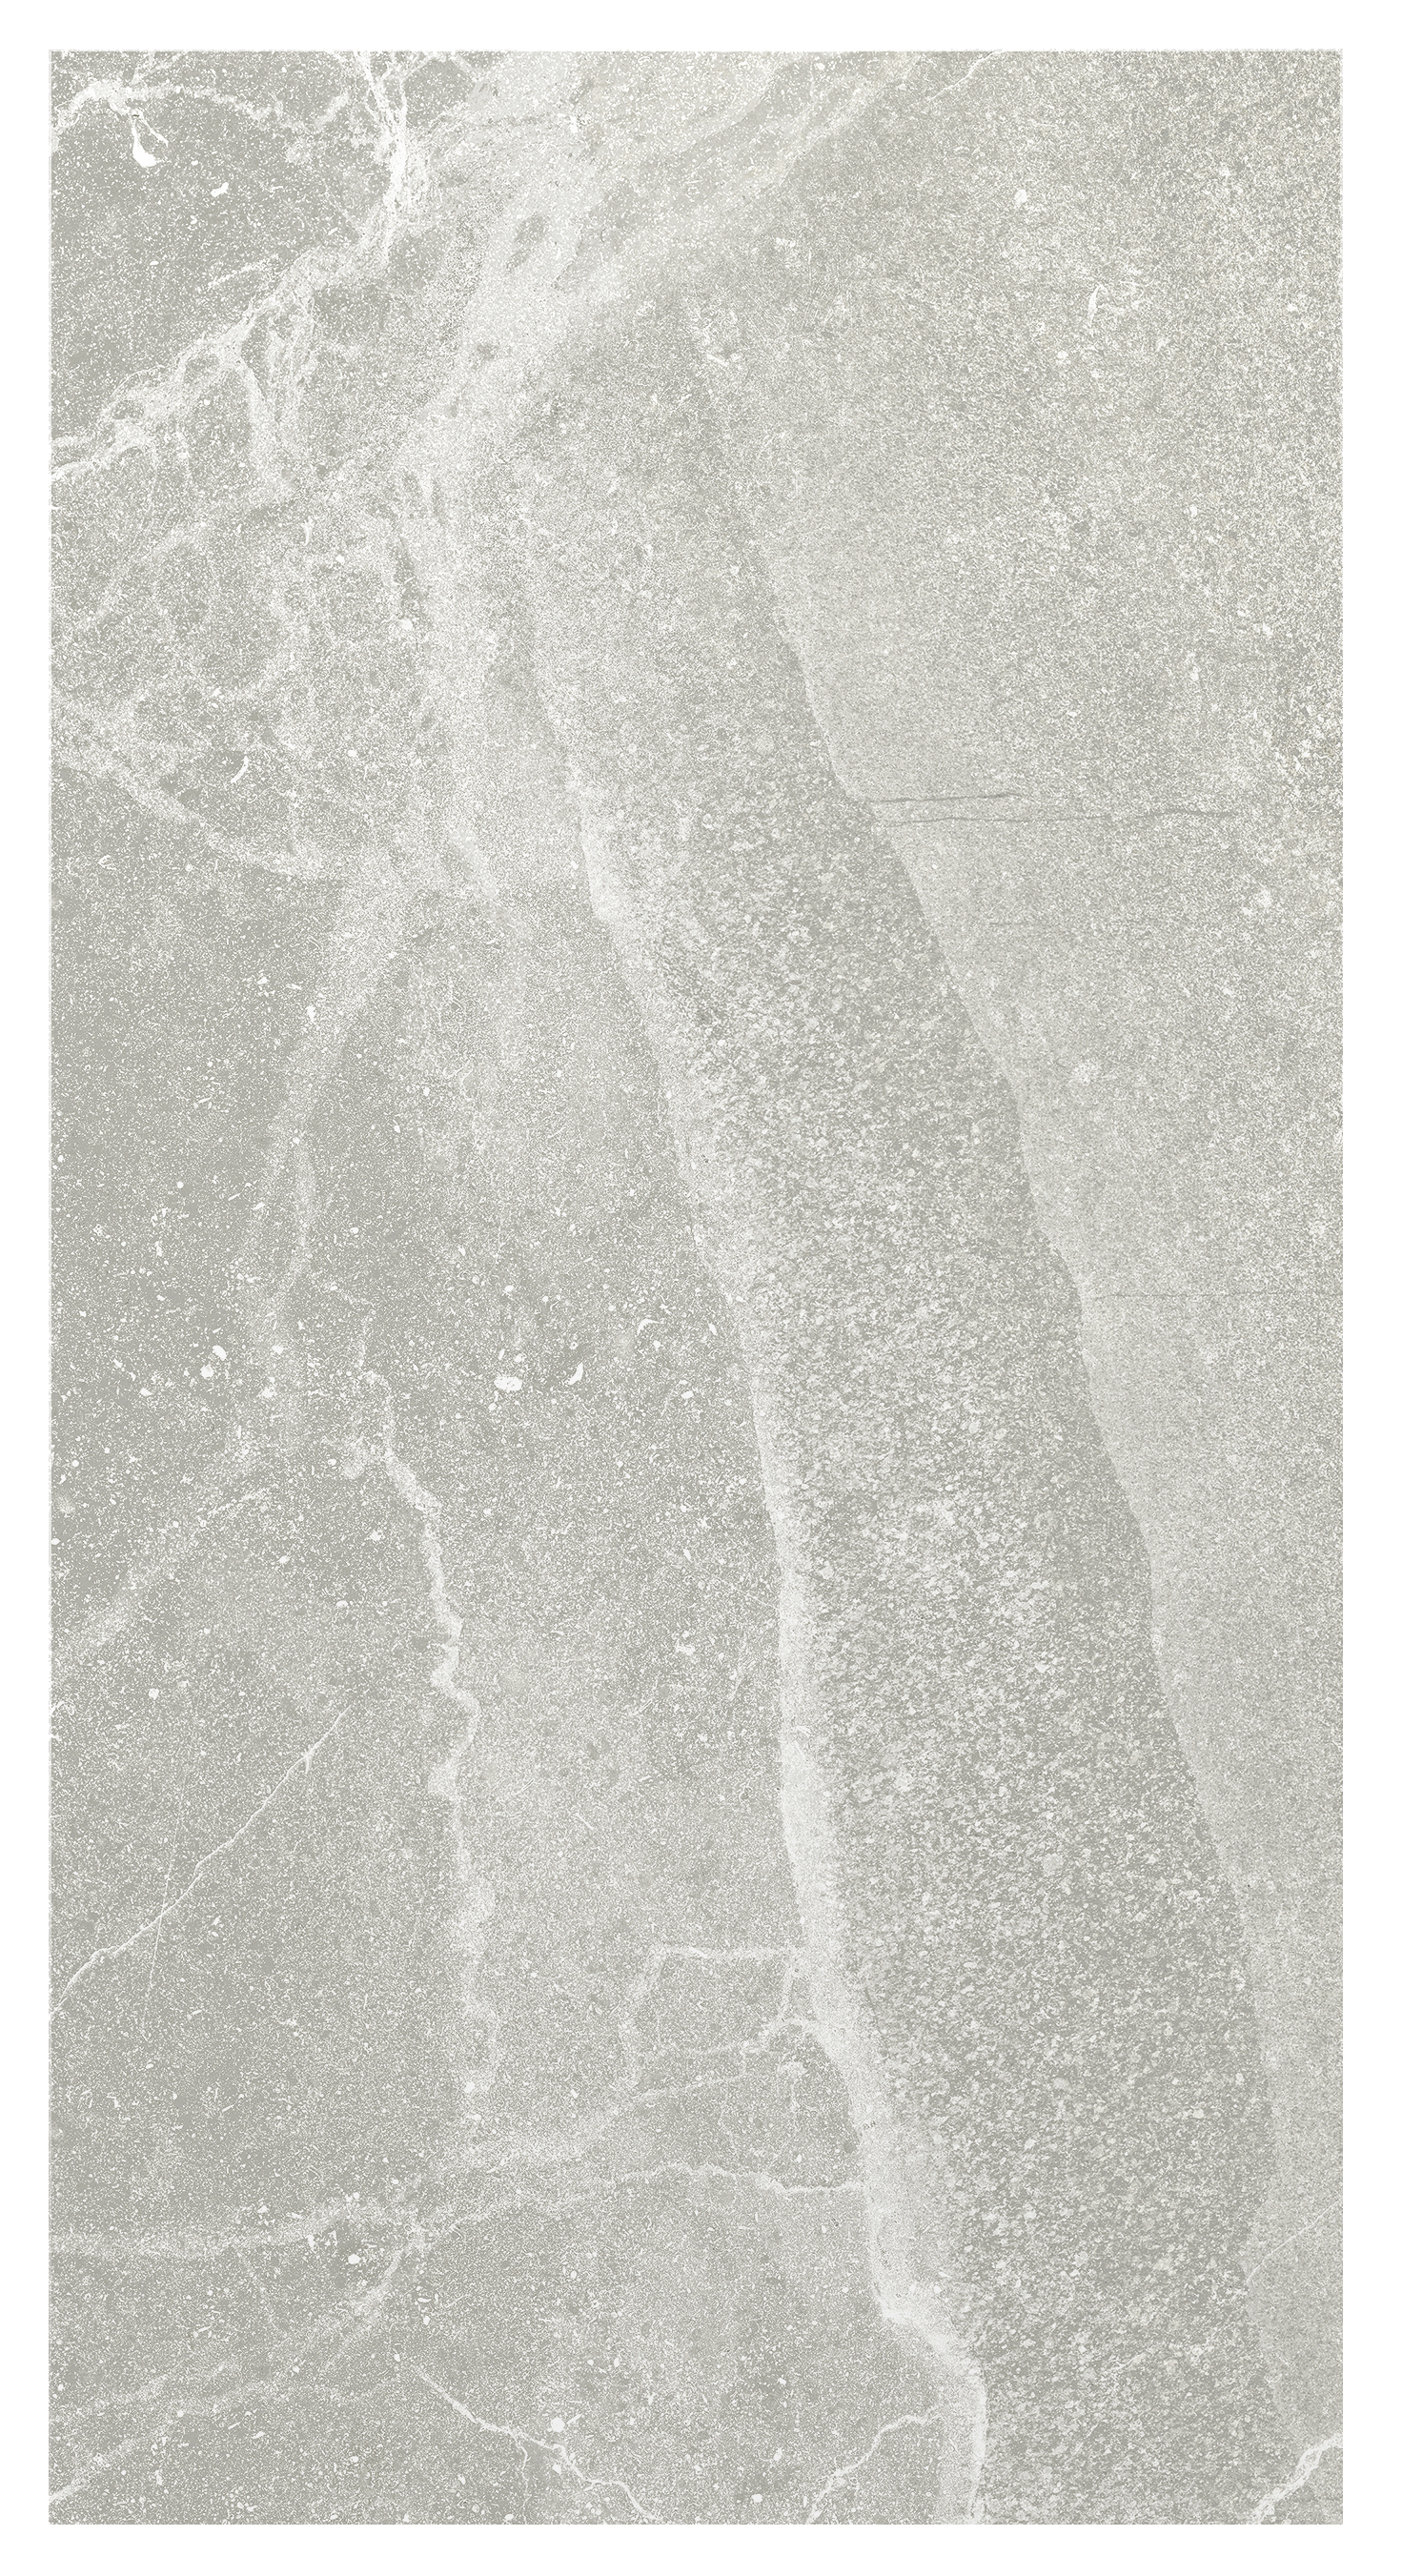 Image of Wickes Mason Grey Porcelain Wall & Floor Tile - 600mm x 300mm